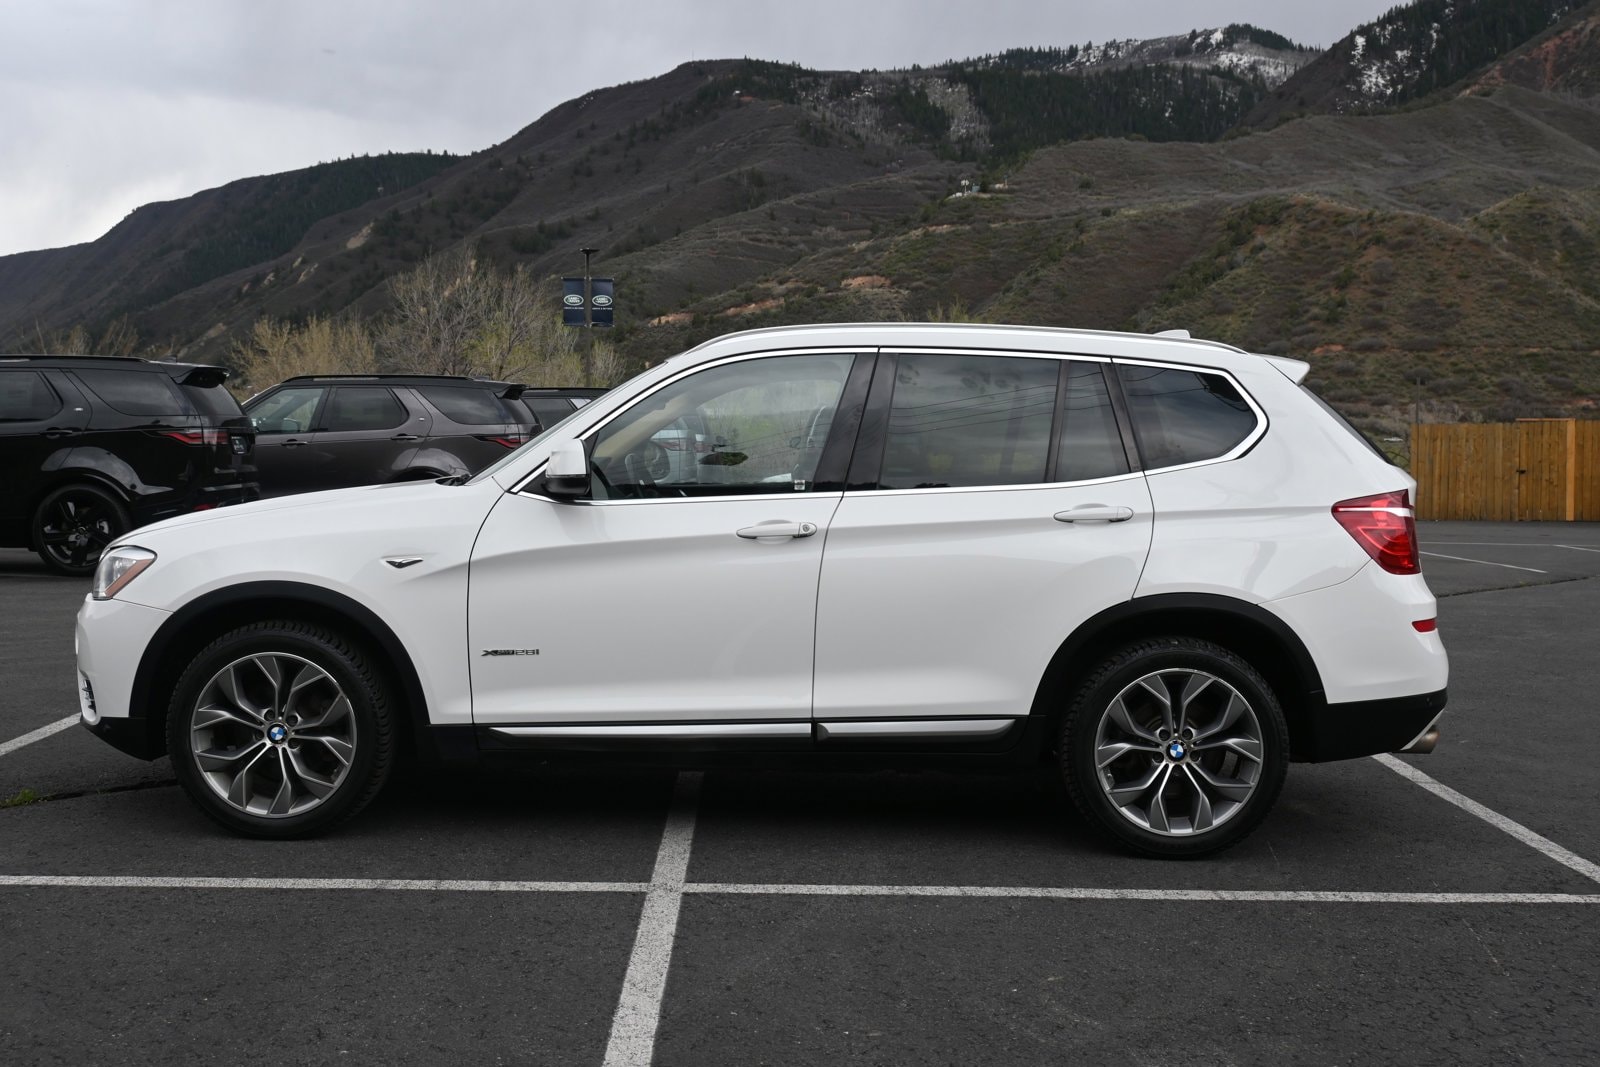 Used 2015 BMW X3 xDrive28i with VIN 5UXWX9C55F0D60795 for sale in Glenwood Springs, CO